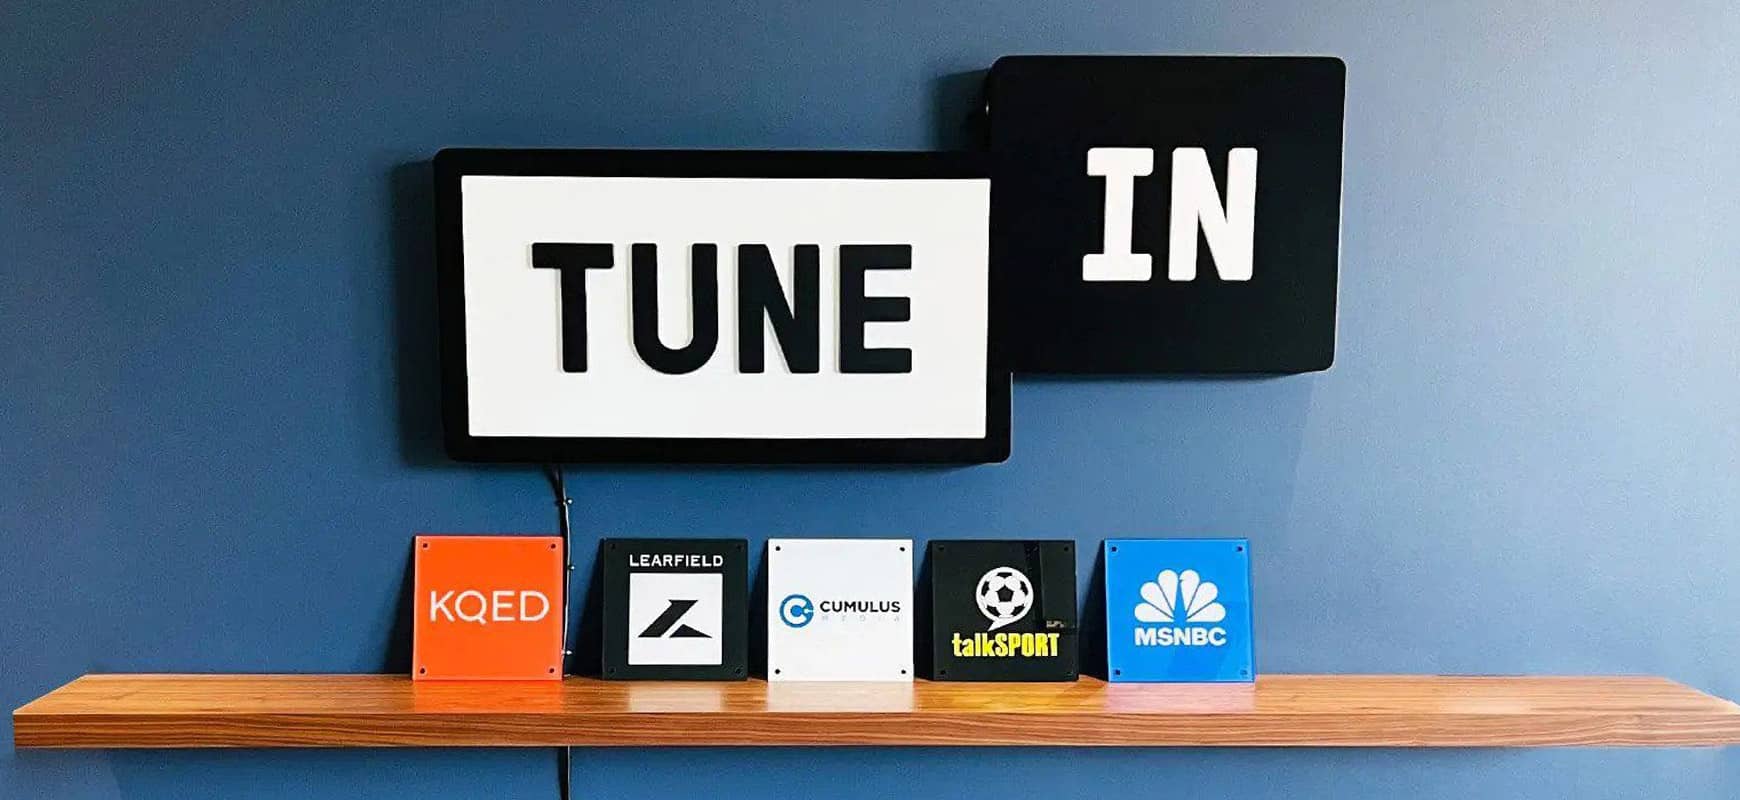 TuneIn logo sign in black and white made of aluminum and acrylic for interior branding